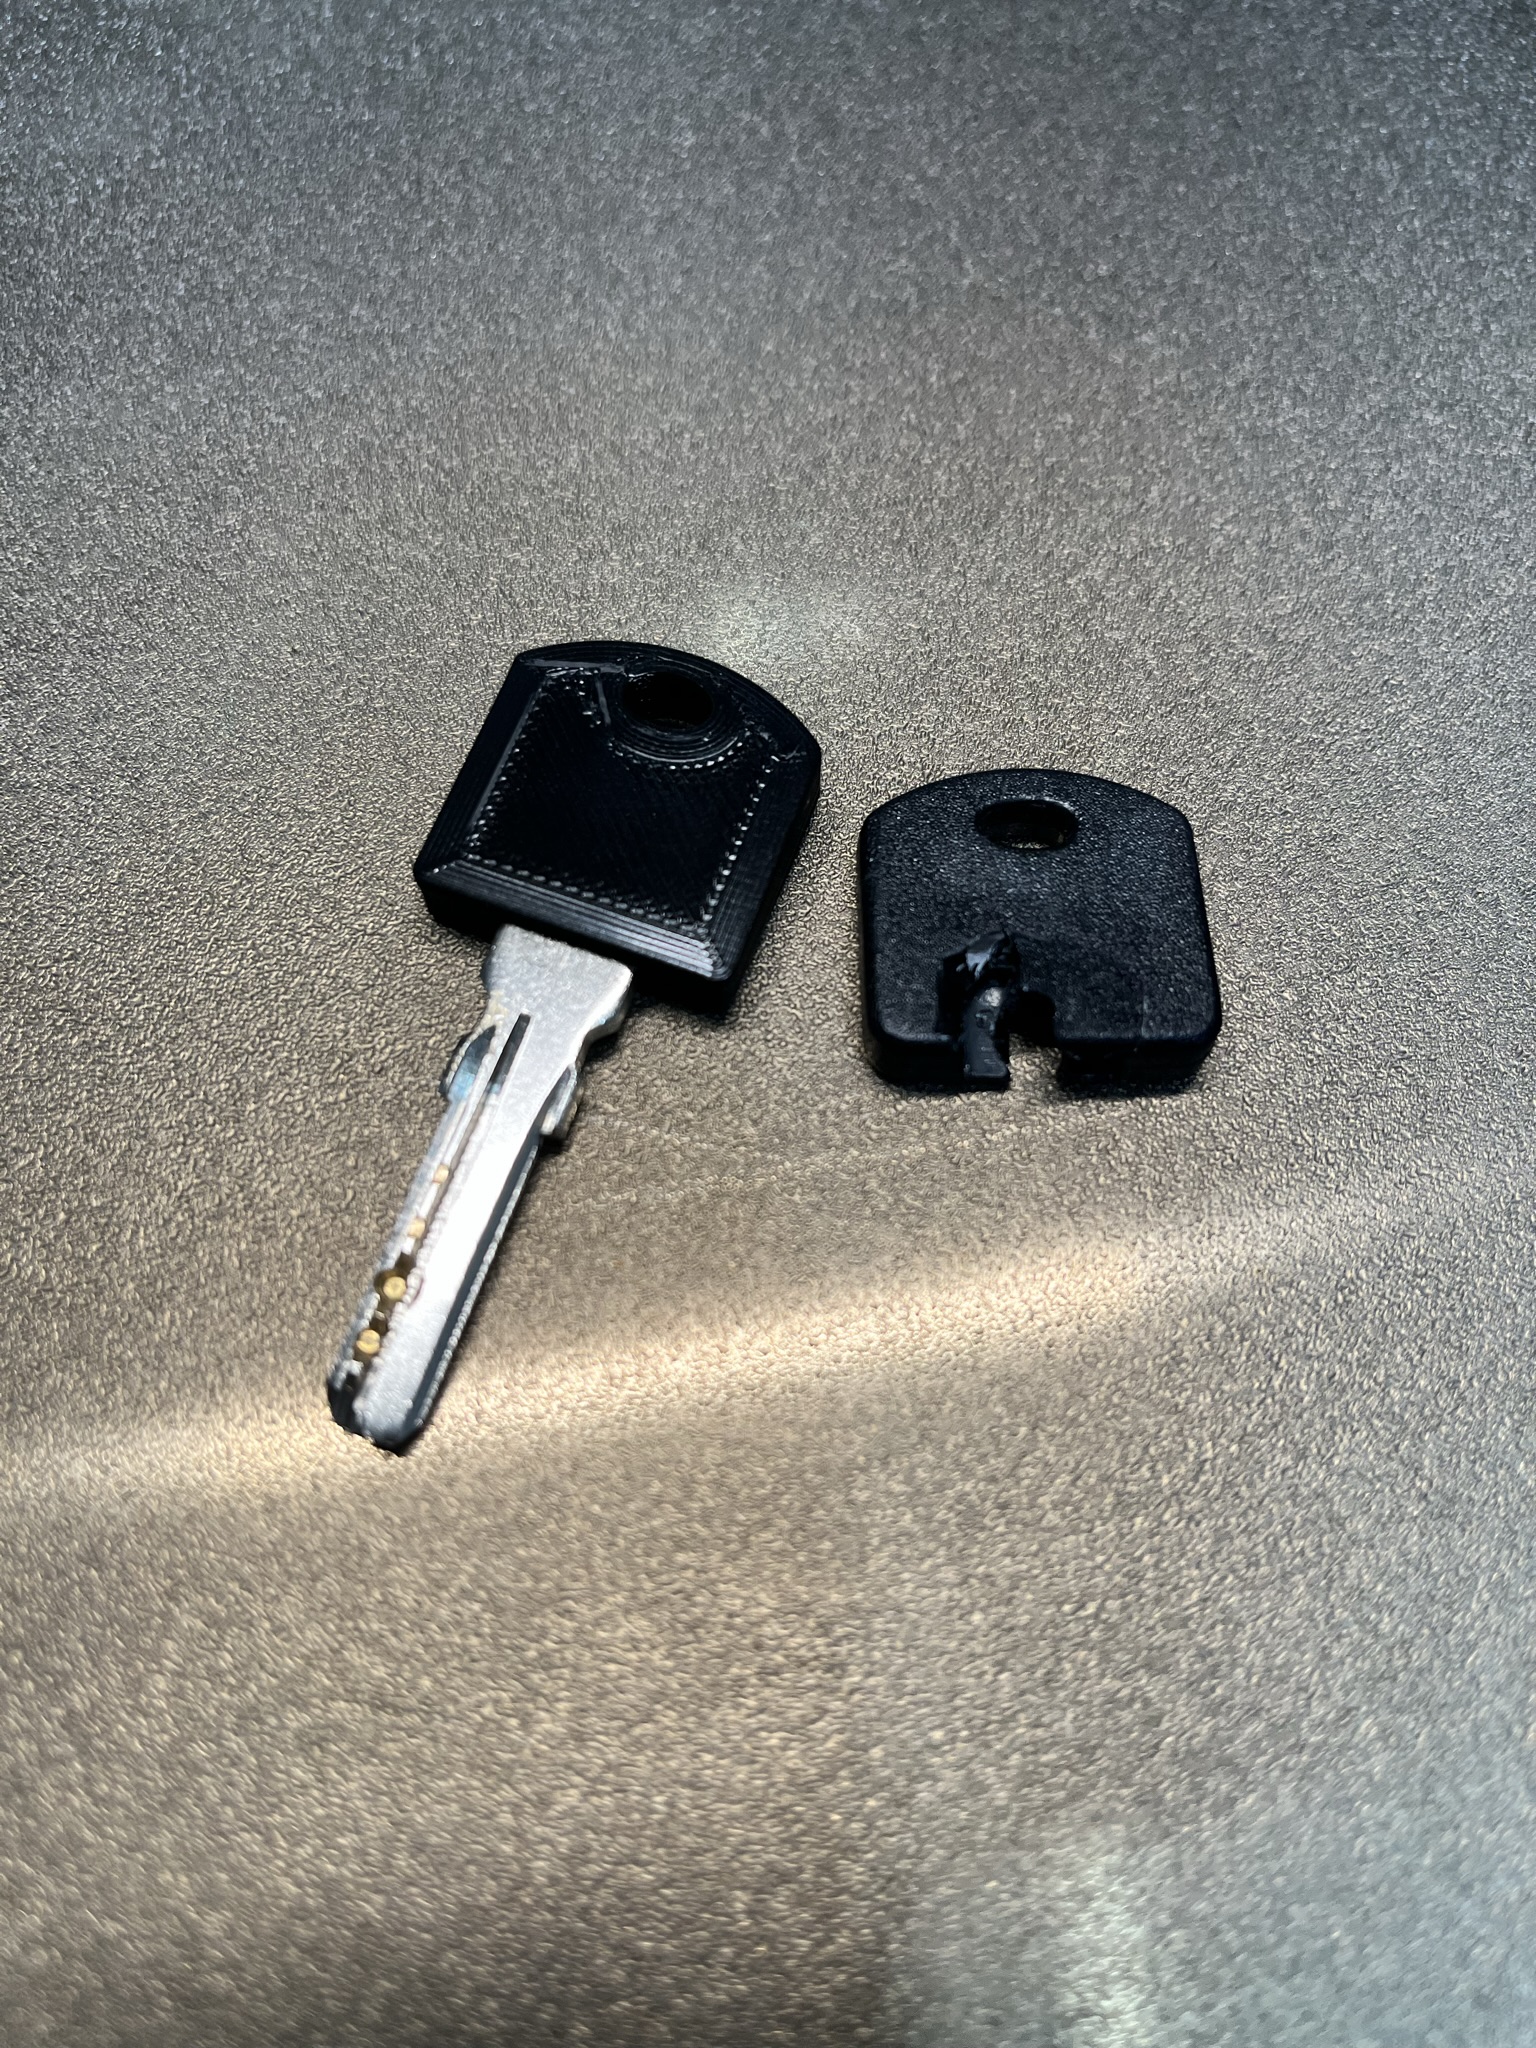 Replacement for broken key fob